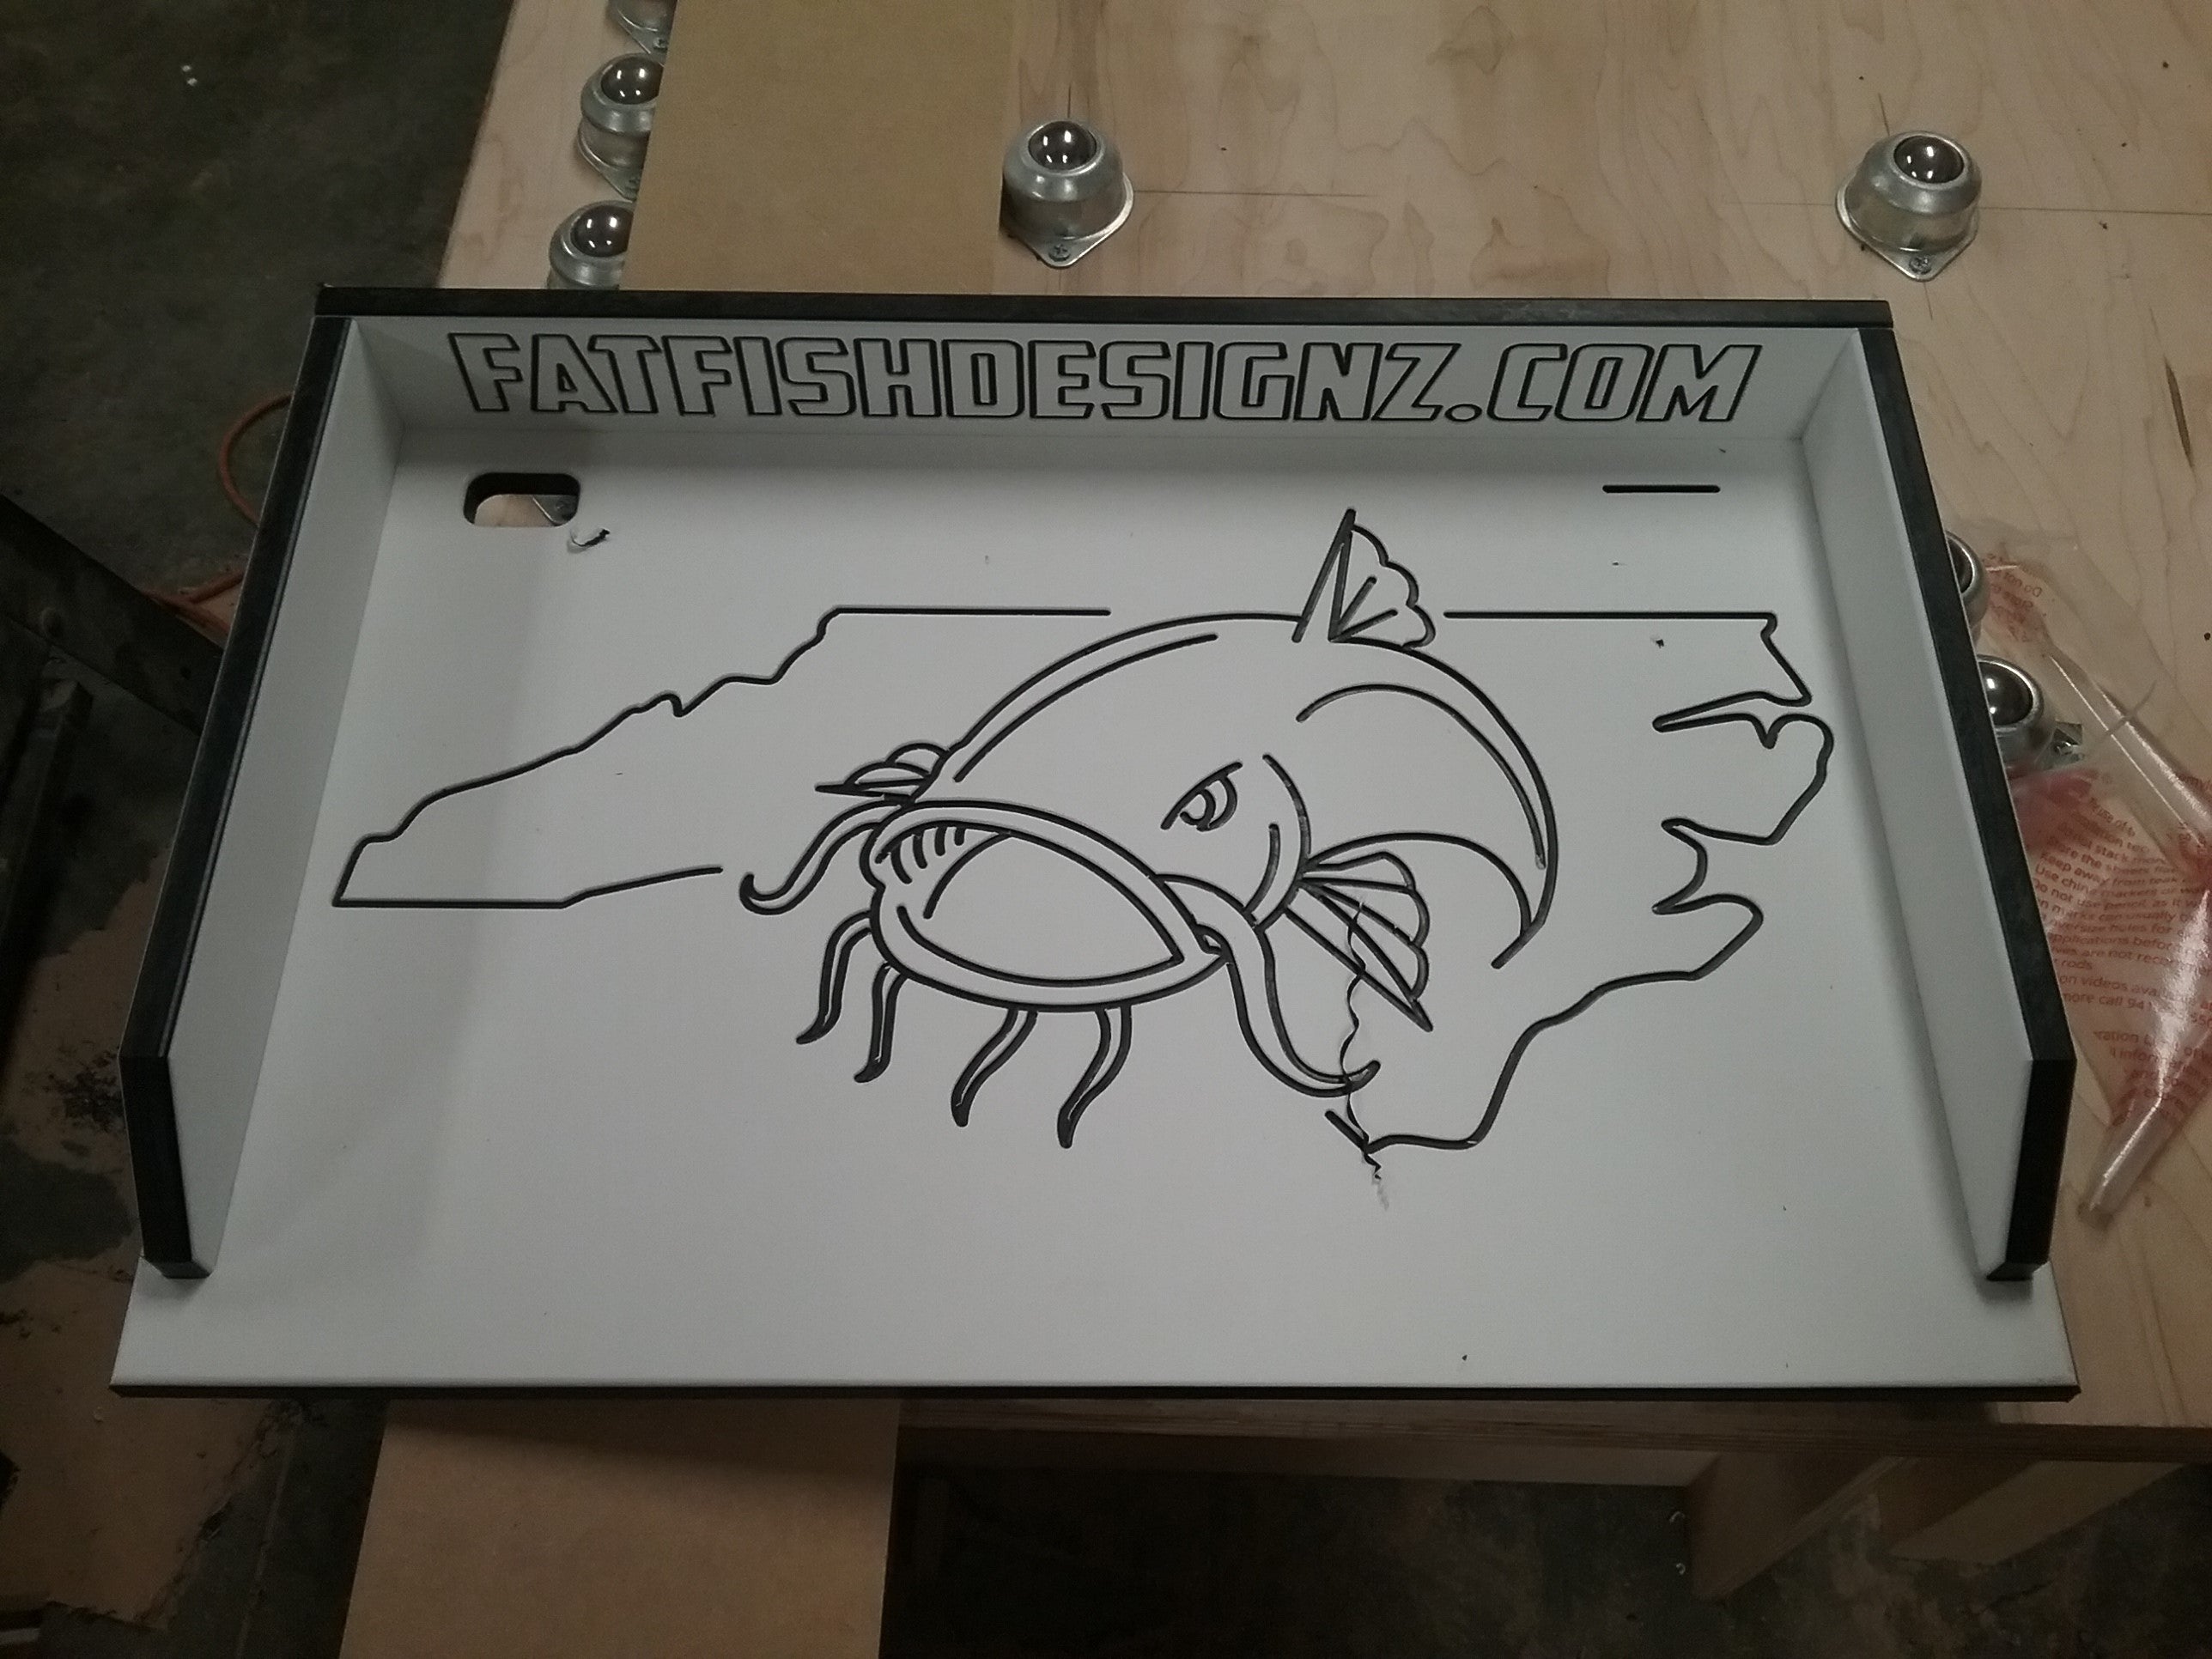 Fish cutting board / Bait cutting board (your state outline w catfish